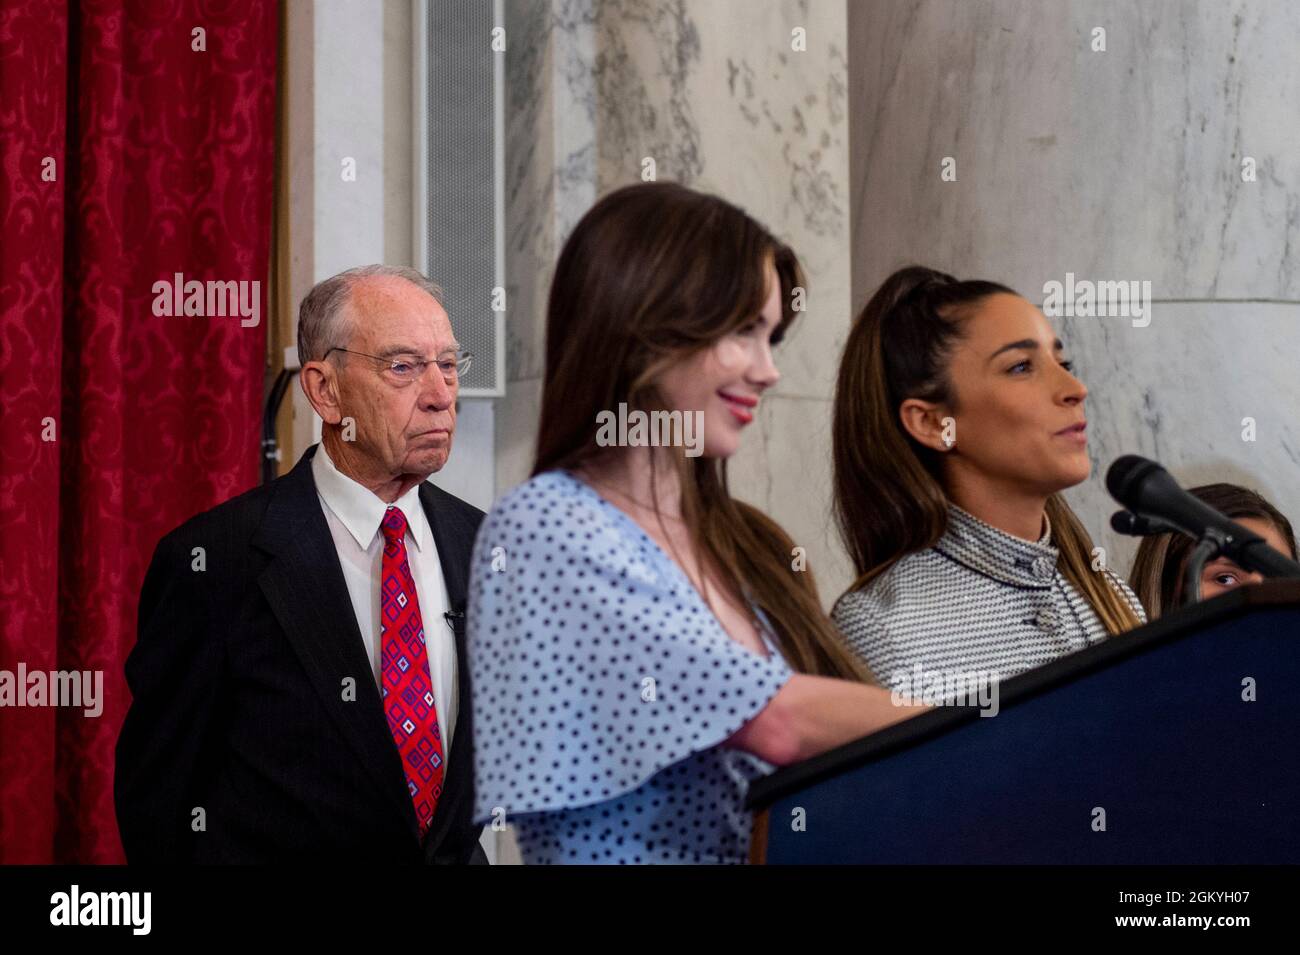 United States Senator Chuck Grassley (Republican of Iowa), left, listens as Former U.S. Olympic gymnast McKayla Maroney, center, and Former U.S. Olympic gymnast Aly Raisman, right, offer remarks during a press conference to talk about the abuse that they and other women gymnasts experienced from Larry Nassar, the now-incarcerated U.S. women's national gymnastics team doctor, and the FBI's handling of their cases, in the Russell Senate Office Building in Washington, DC, Wednesday, September 15, 2021. Credit: Rod Lamkey/CNP/Sipa USA Stock Photo